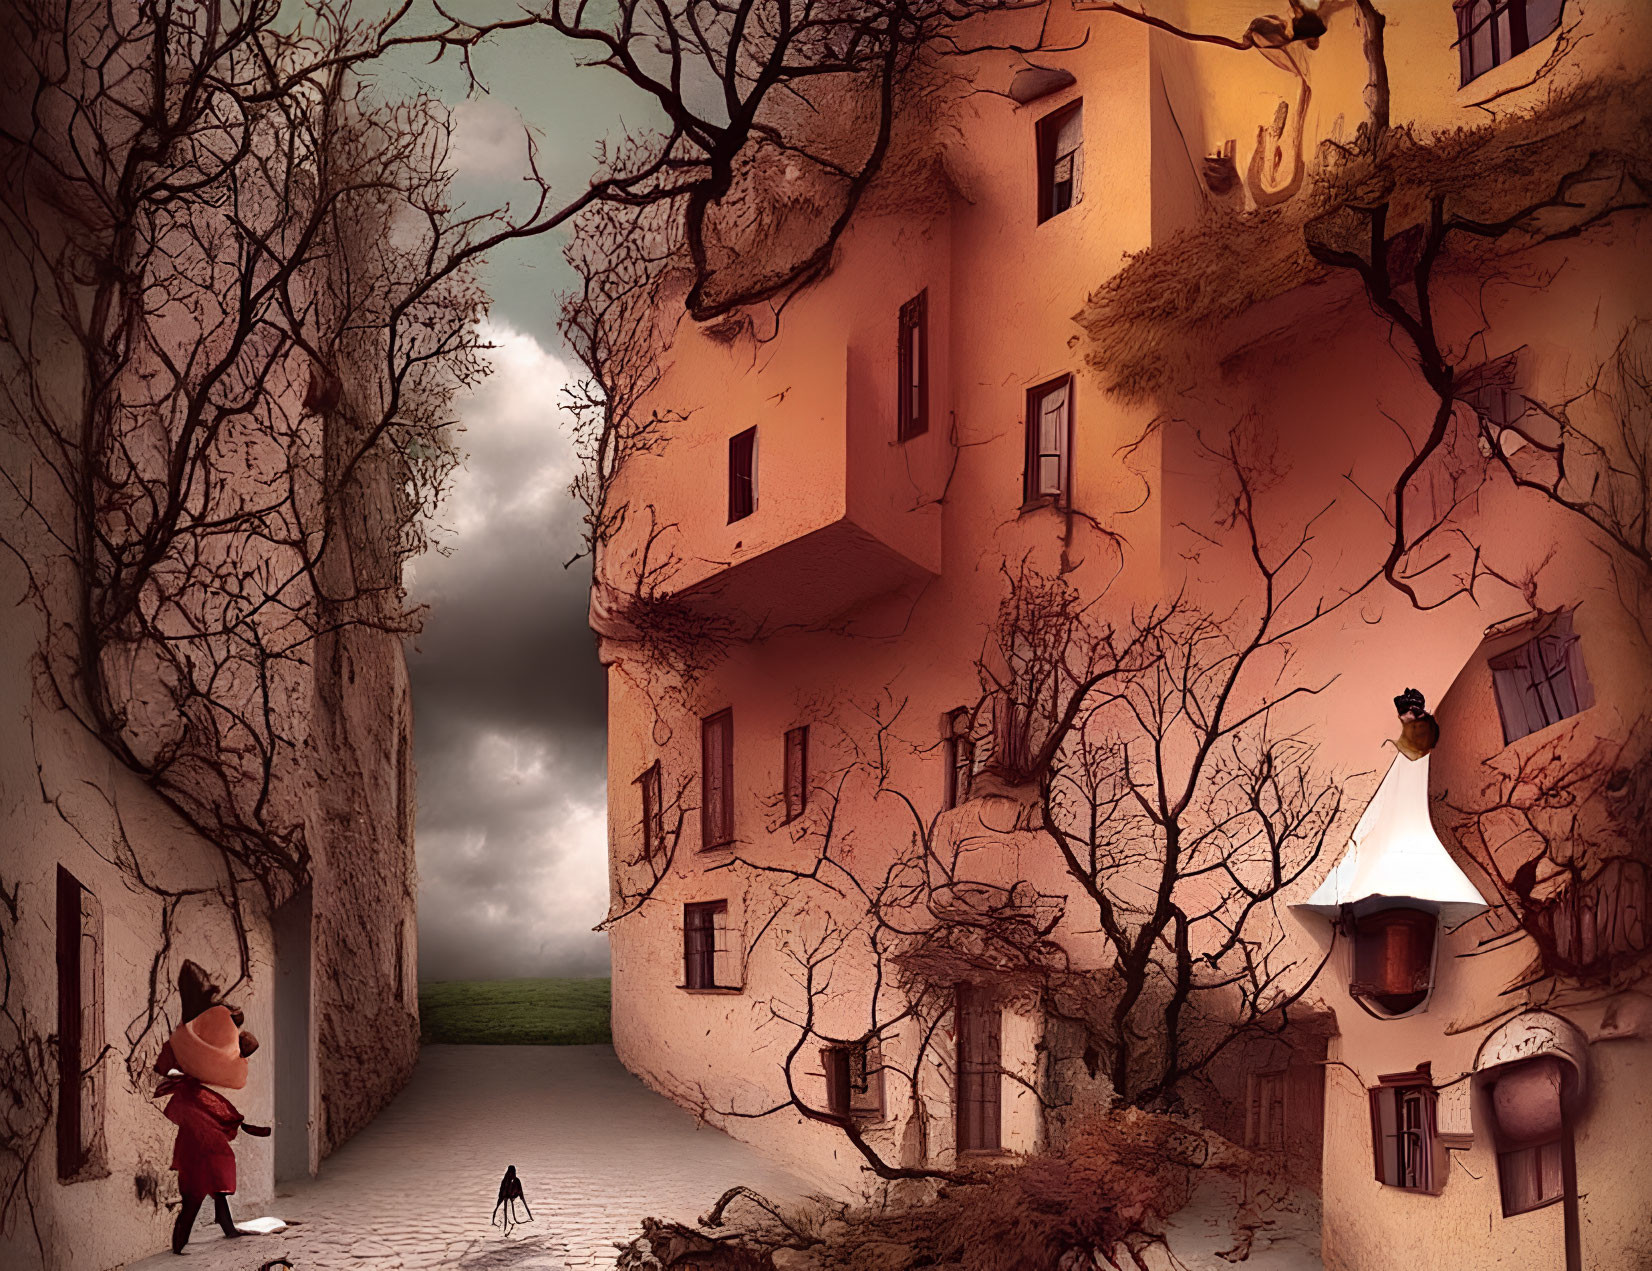 Whimsical accordion musician in surreal cityscape with cat